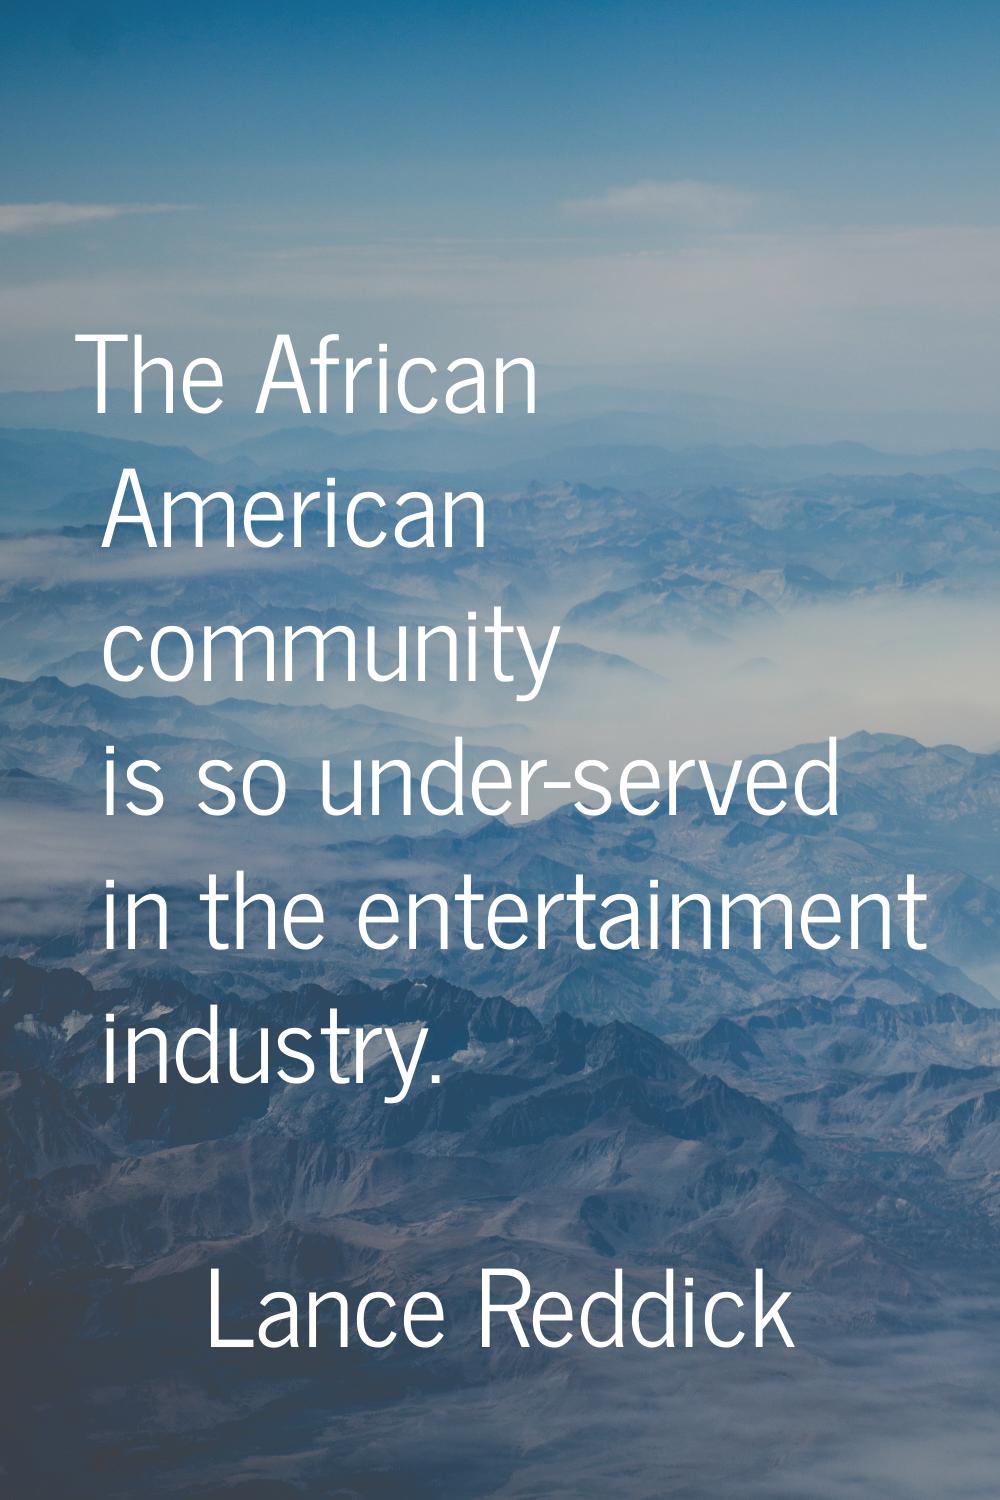 The African American community is so under-served in the entertainment industry.